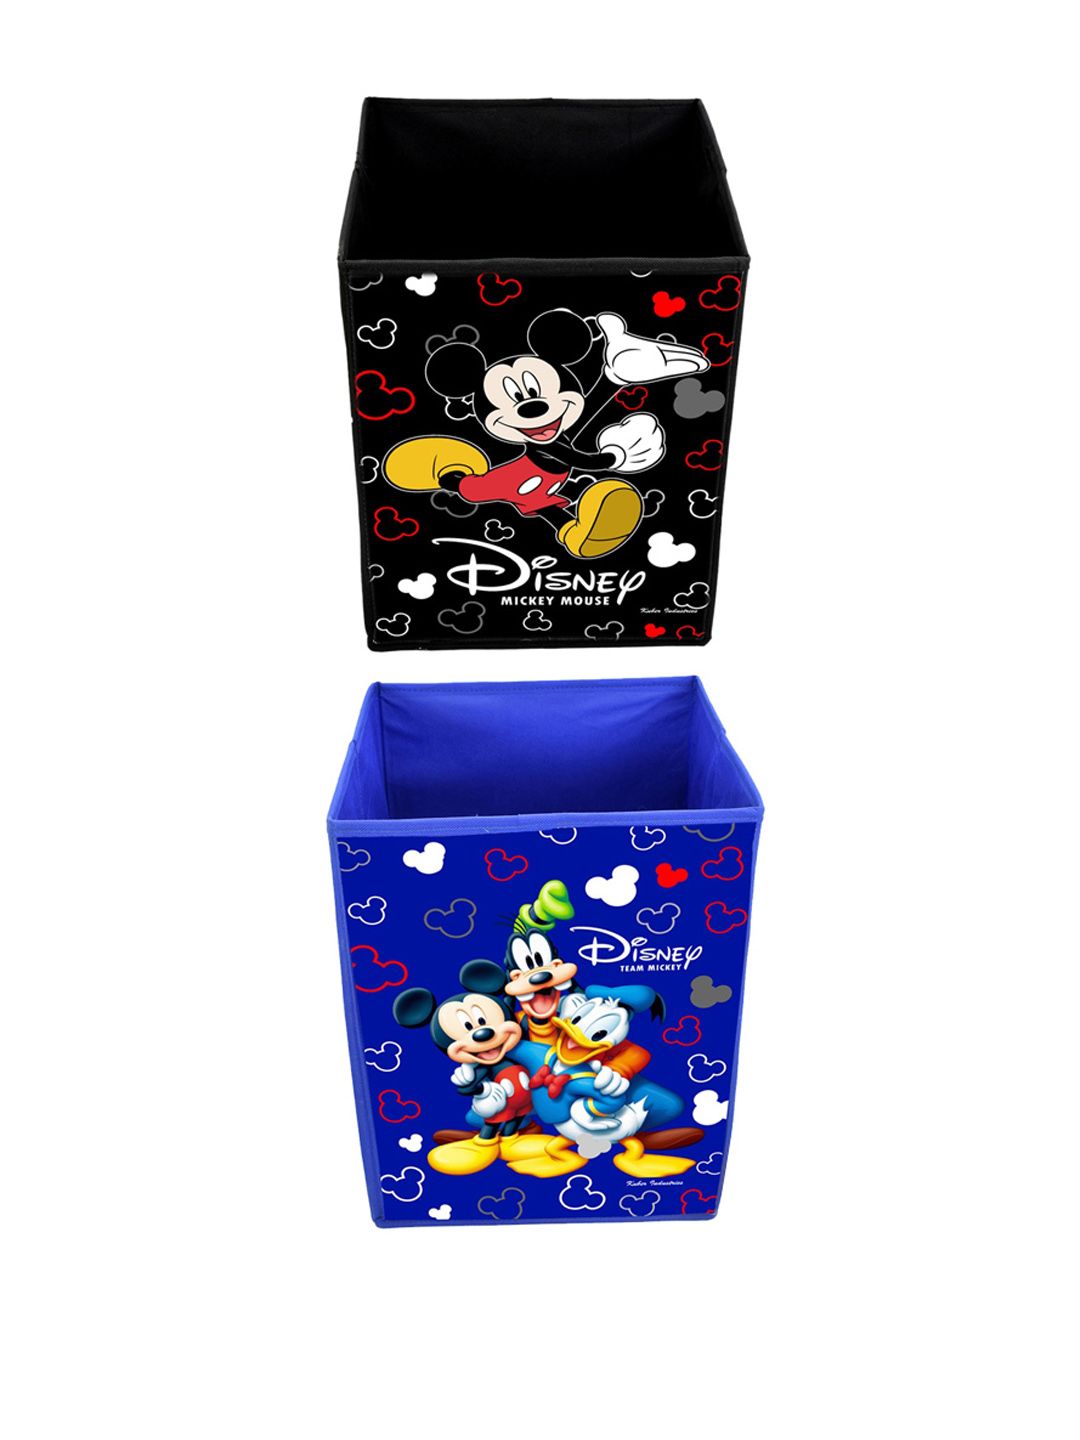 Kuber Industries Set of 2 Printed Disney Mickey Mouse Multi-Utility Storage Baskets with Handles Price in India